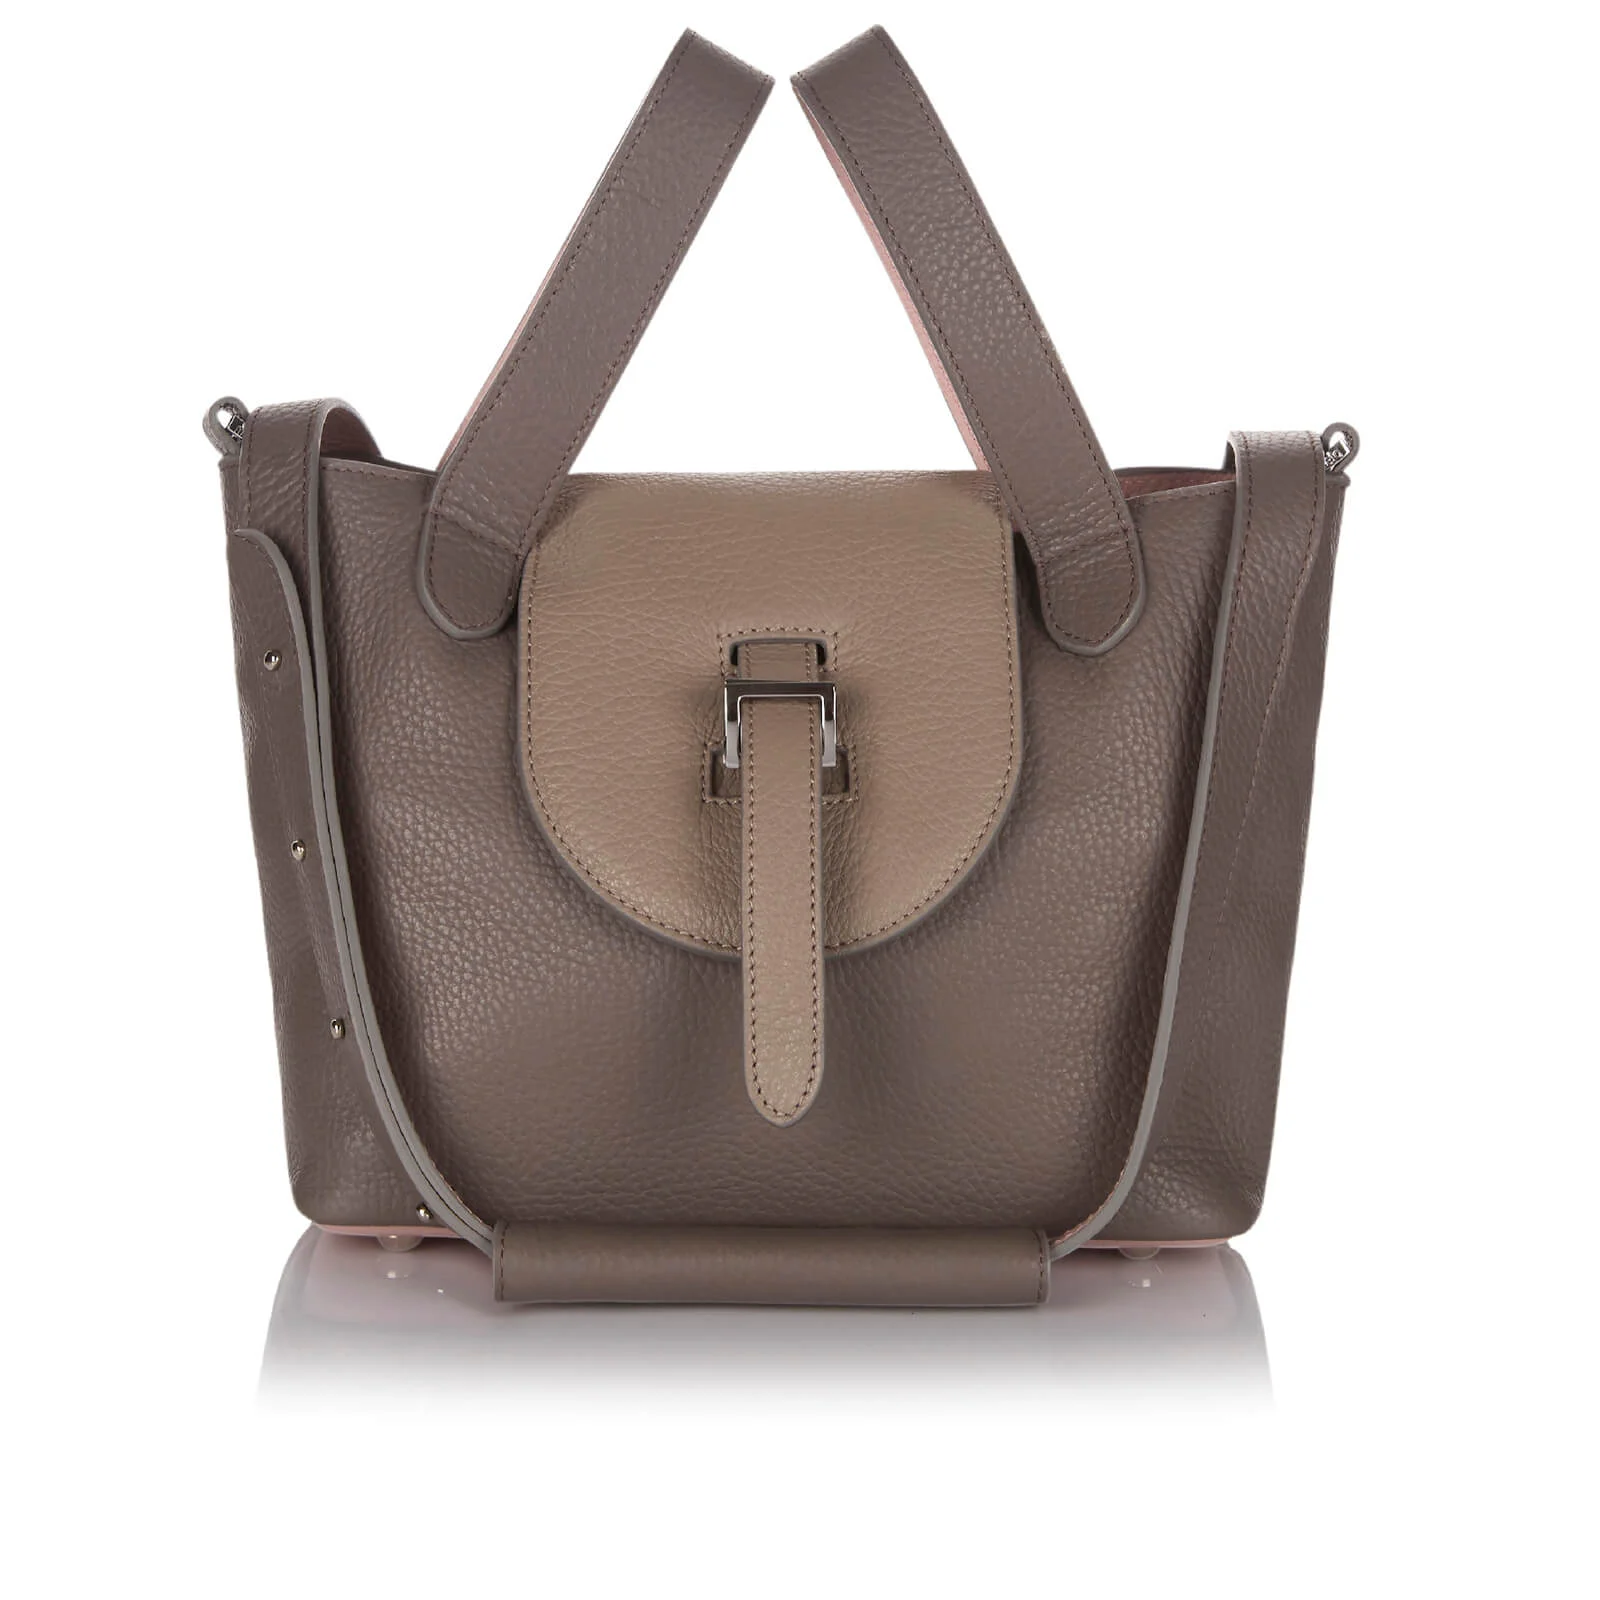 meli melo Women's Thela Mini Tote Bag - Taupe/Dusty Pink Image 1